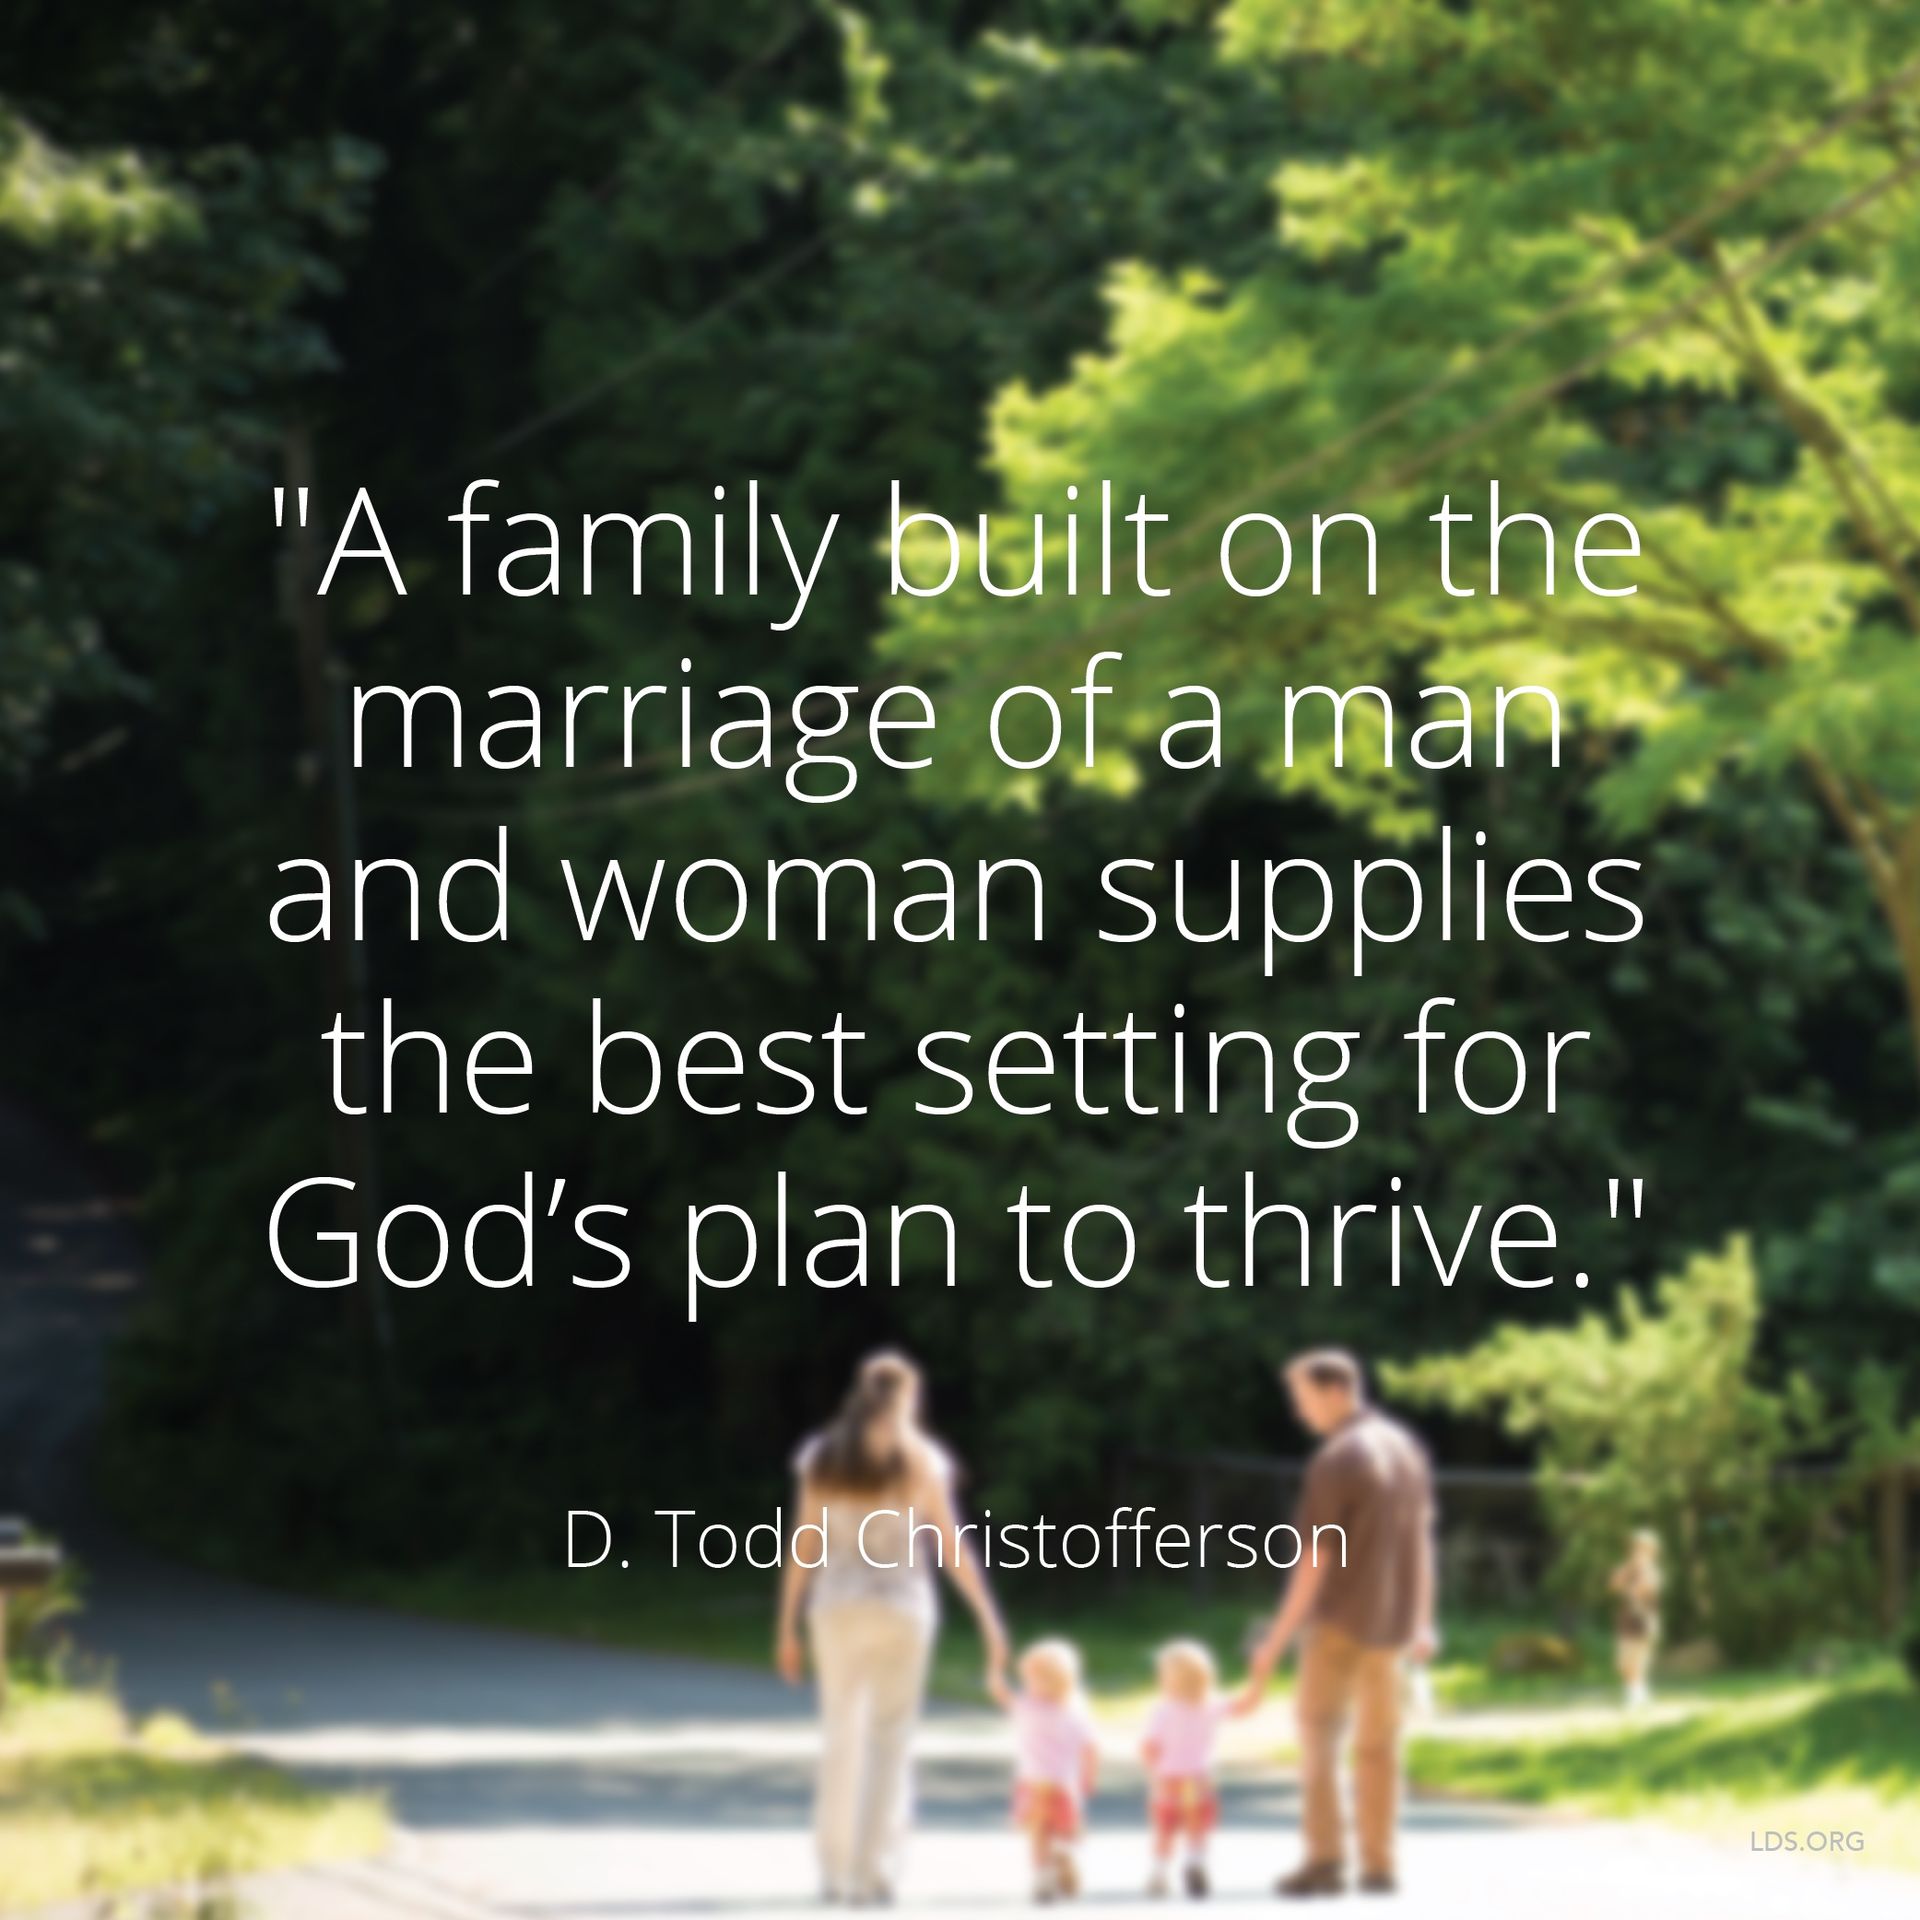 “A family built on the marriage of a man and woman supplies the best setting for God’s plan to thrive.”—Elder D. Todd Christofferson, “Why Marriage, Why Family” © undefined ipCode 1.